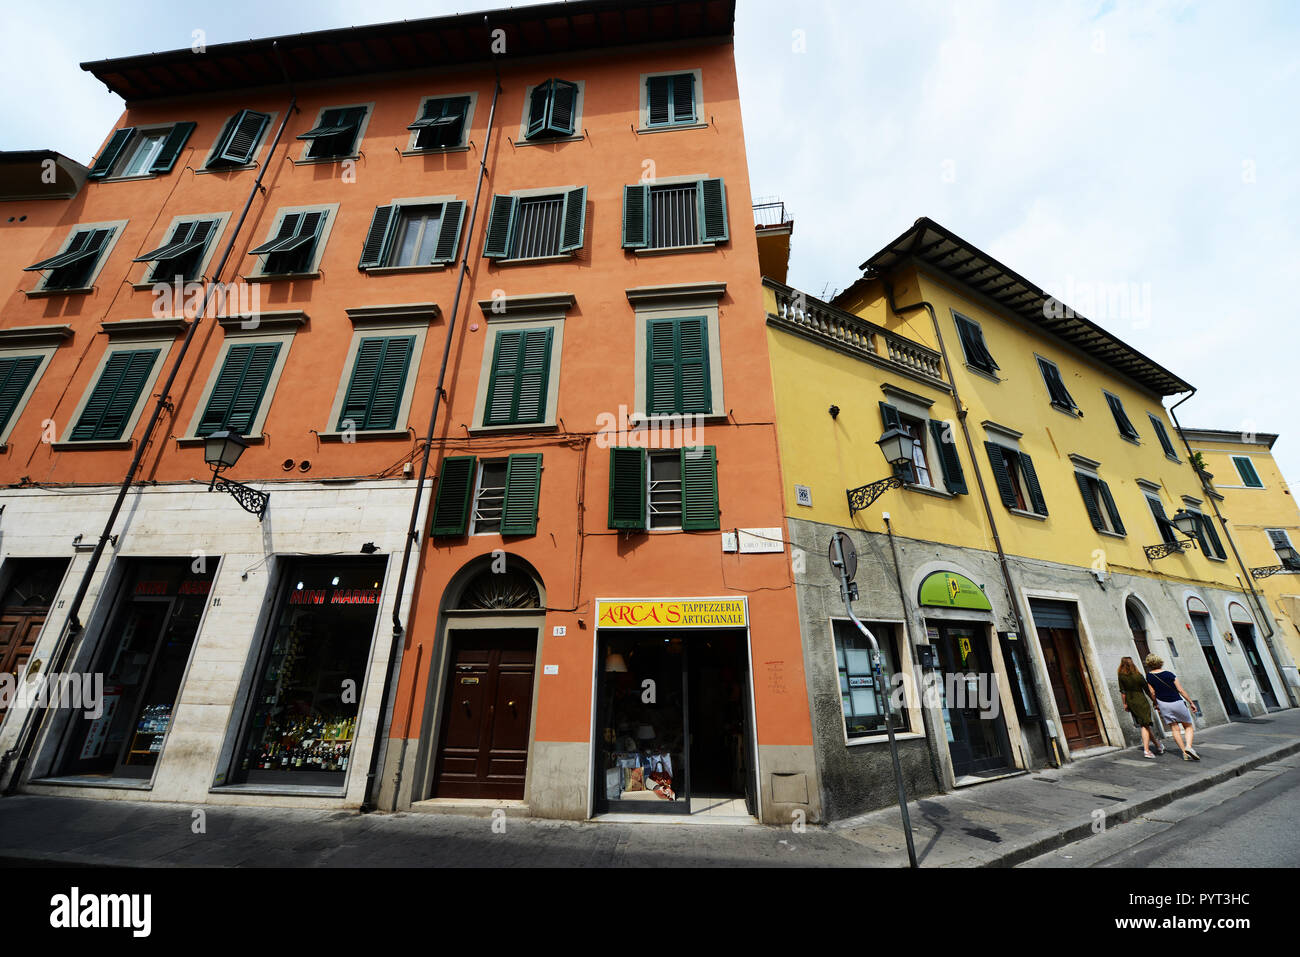 Old buildings on Via Carlo Fedeli in the old city of Pisa. Stock Photo